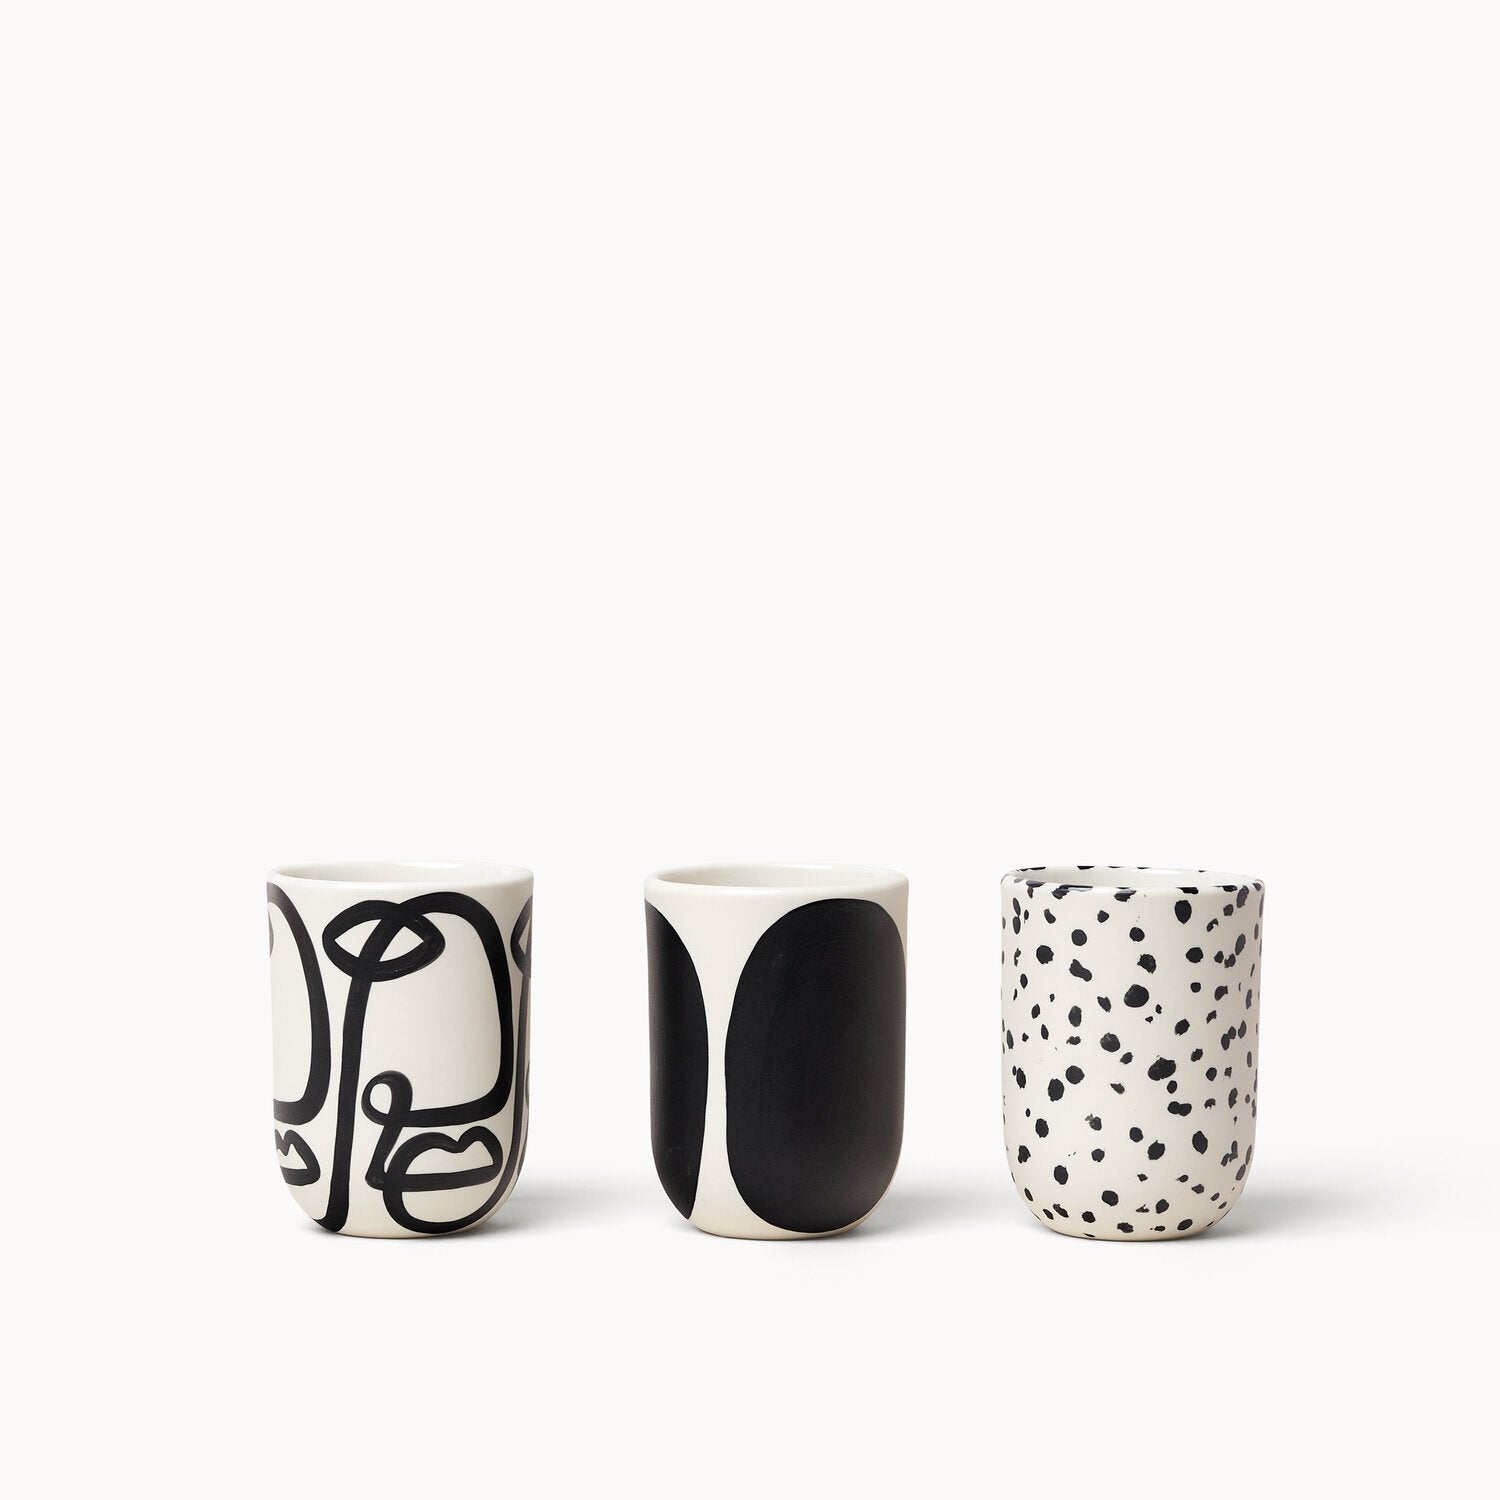 Speckled Coffee Cup